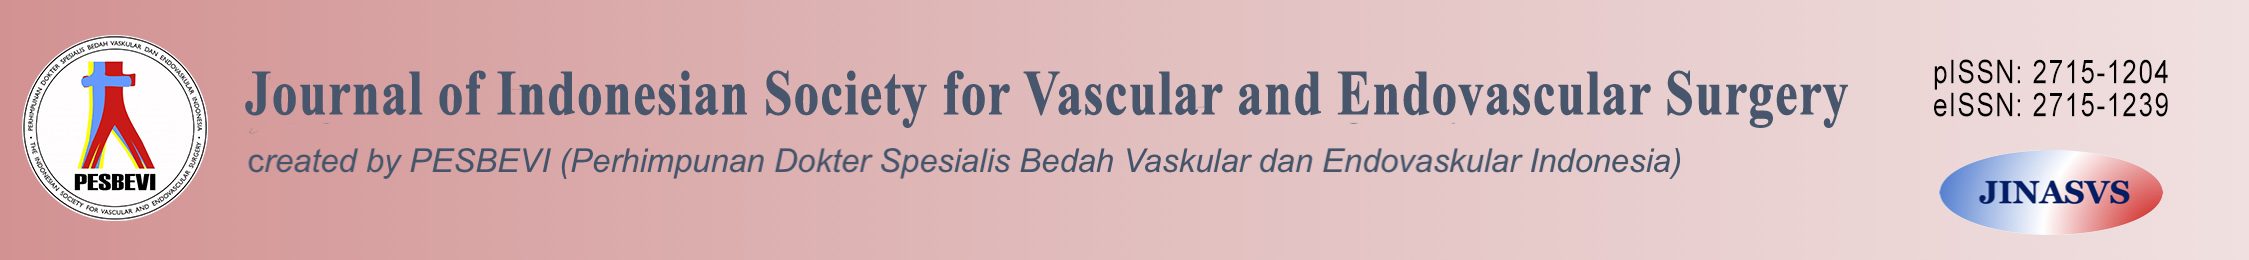 Journal of Indonesian Society for Vascular and Endovascular Surgery